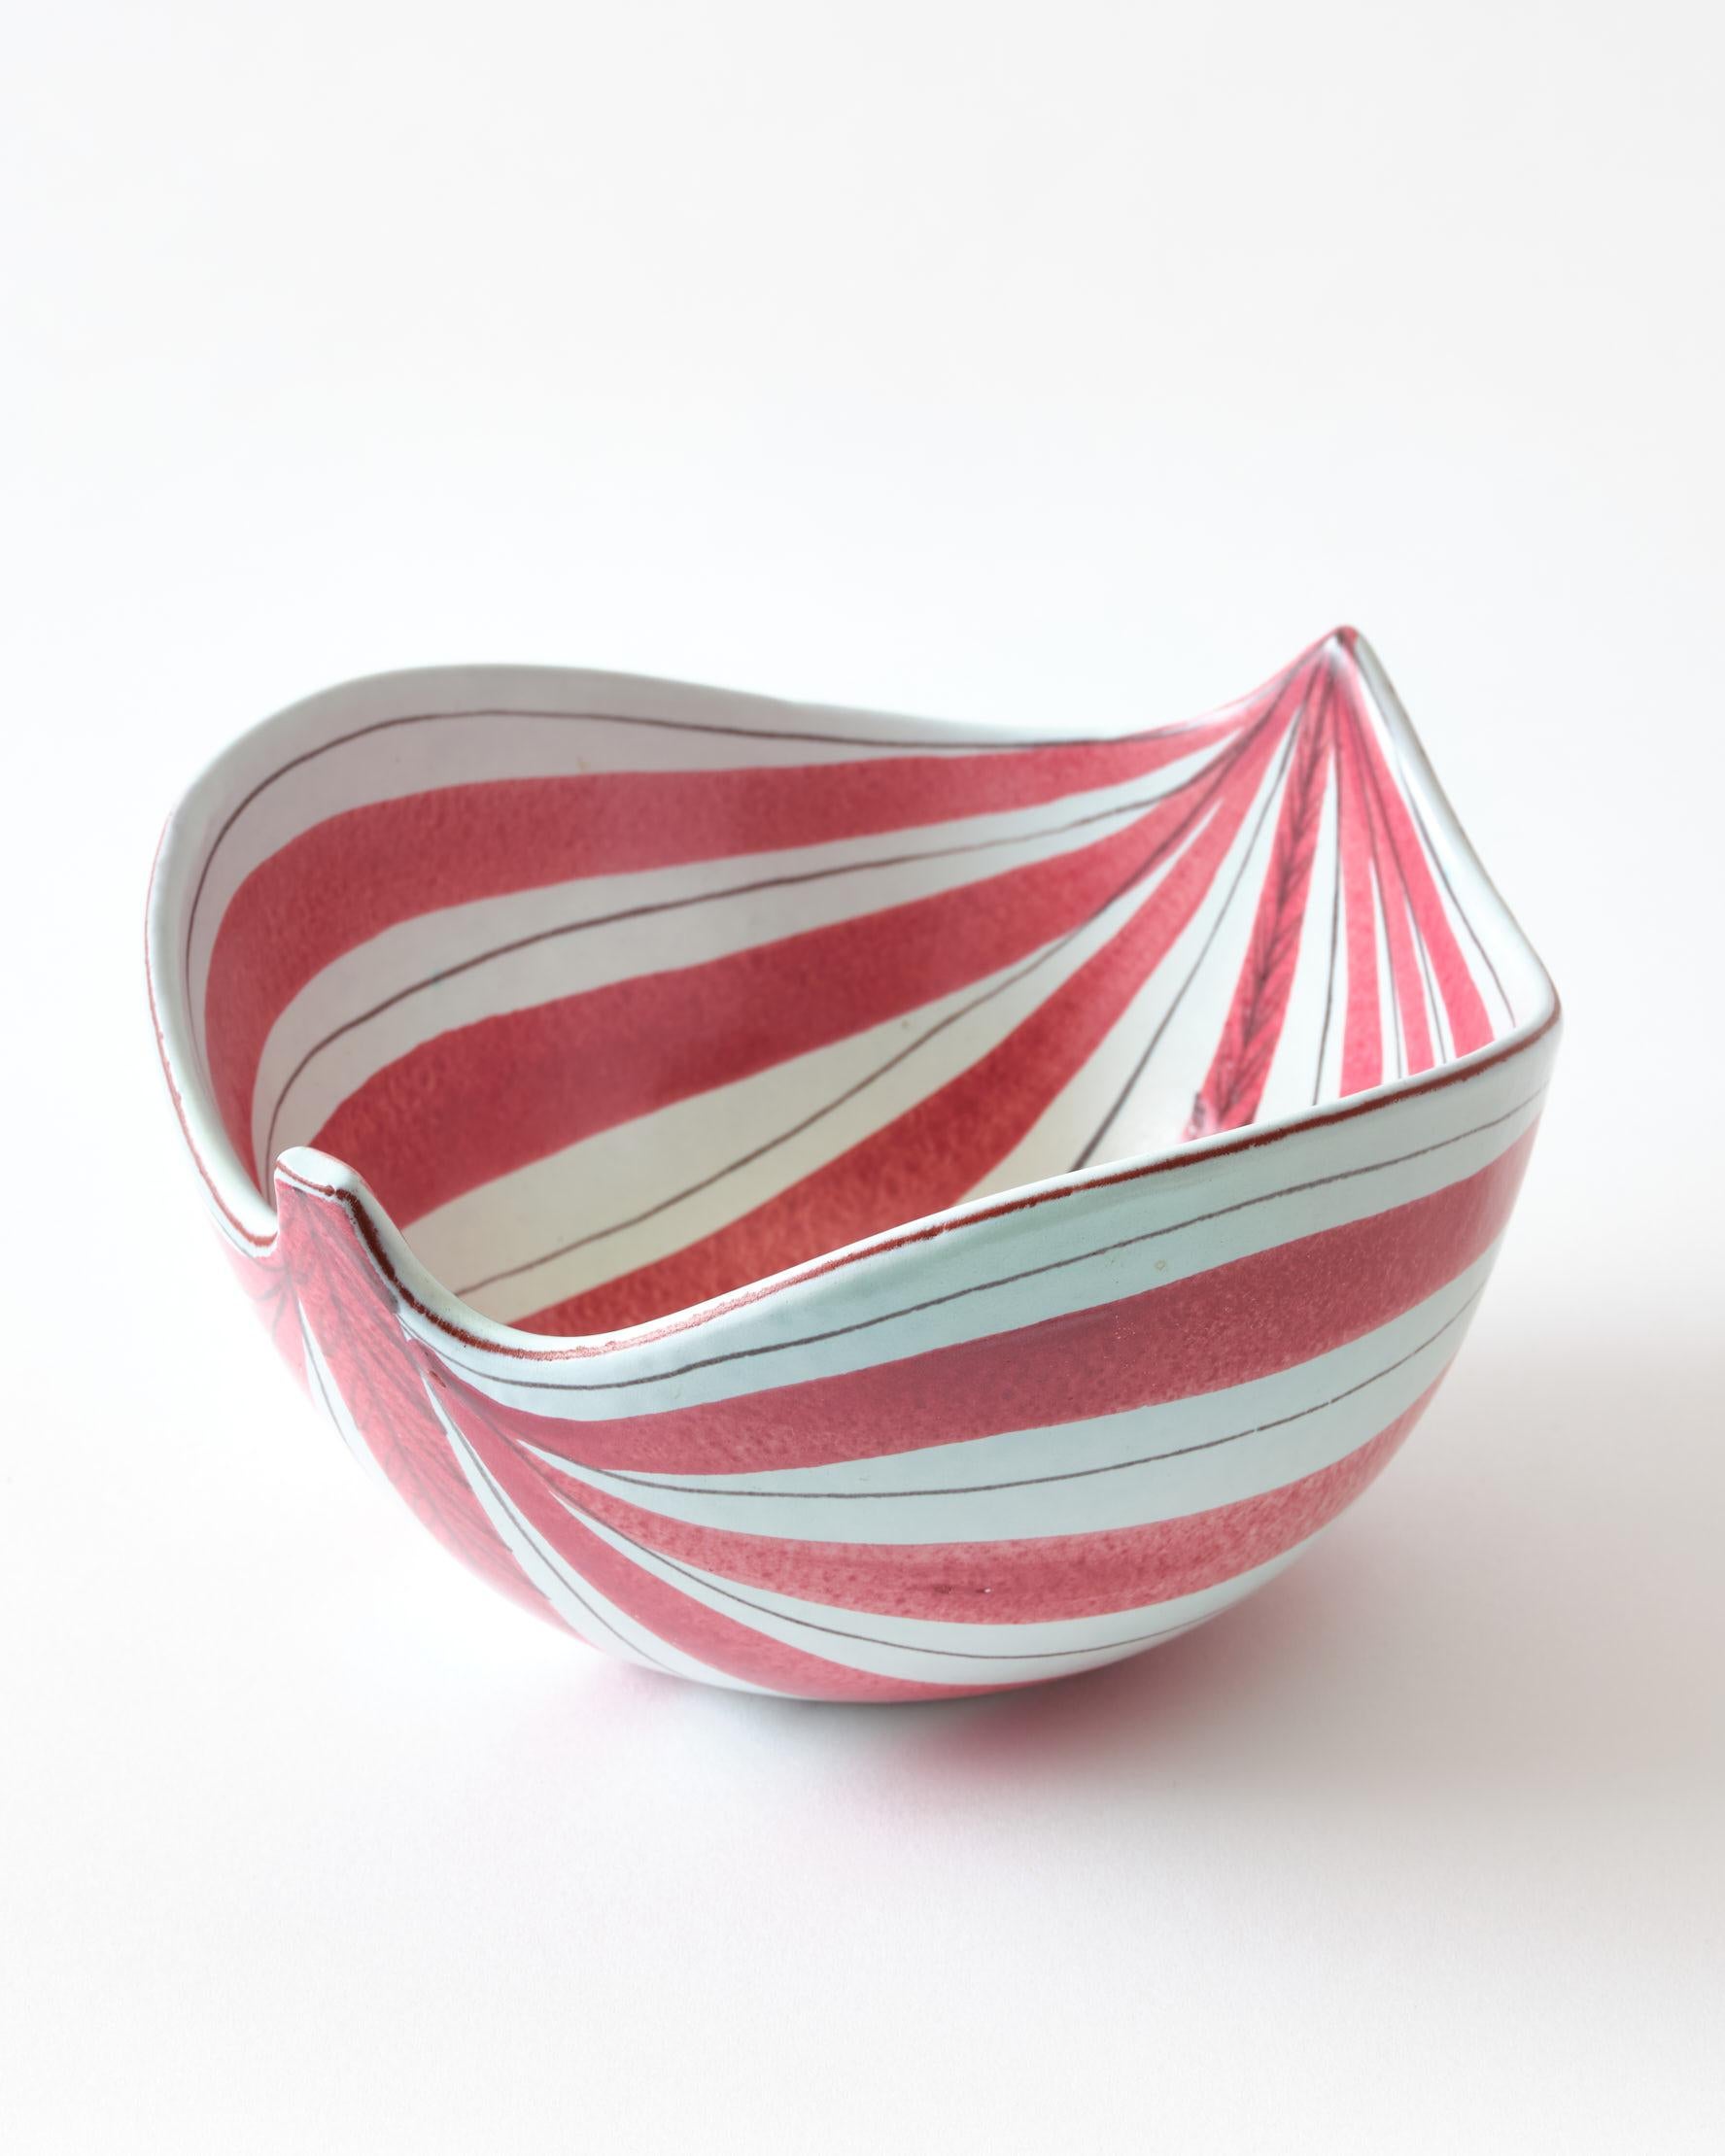 Mid-20th Century Ceramic Bowl by Stig Lindberg, Sweden, Red & White Striped, Signed, C 1950 For Sale